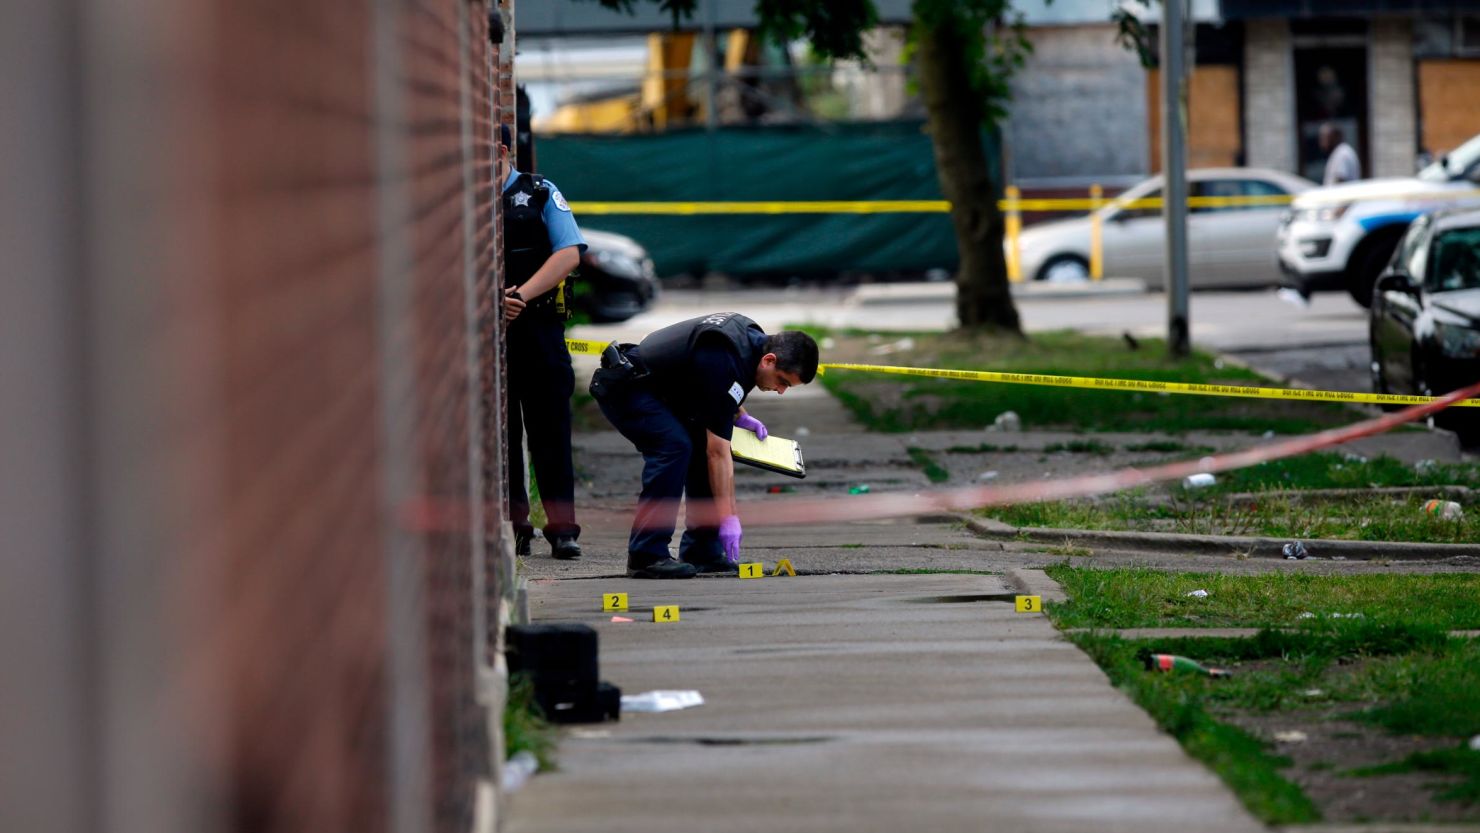 Gun crime and murders have decreased in Chicago for the second straight year, police say.